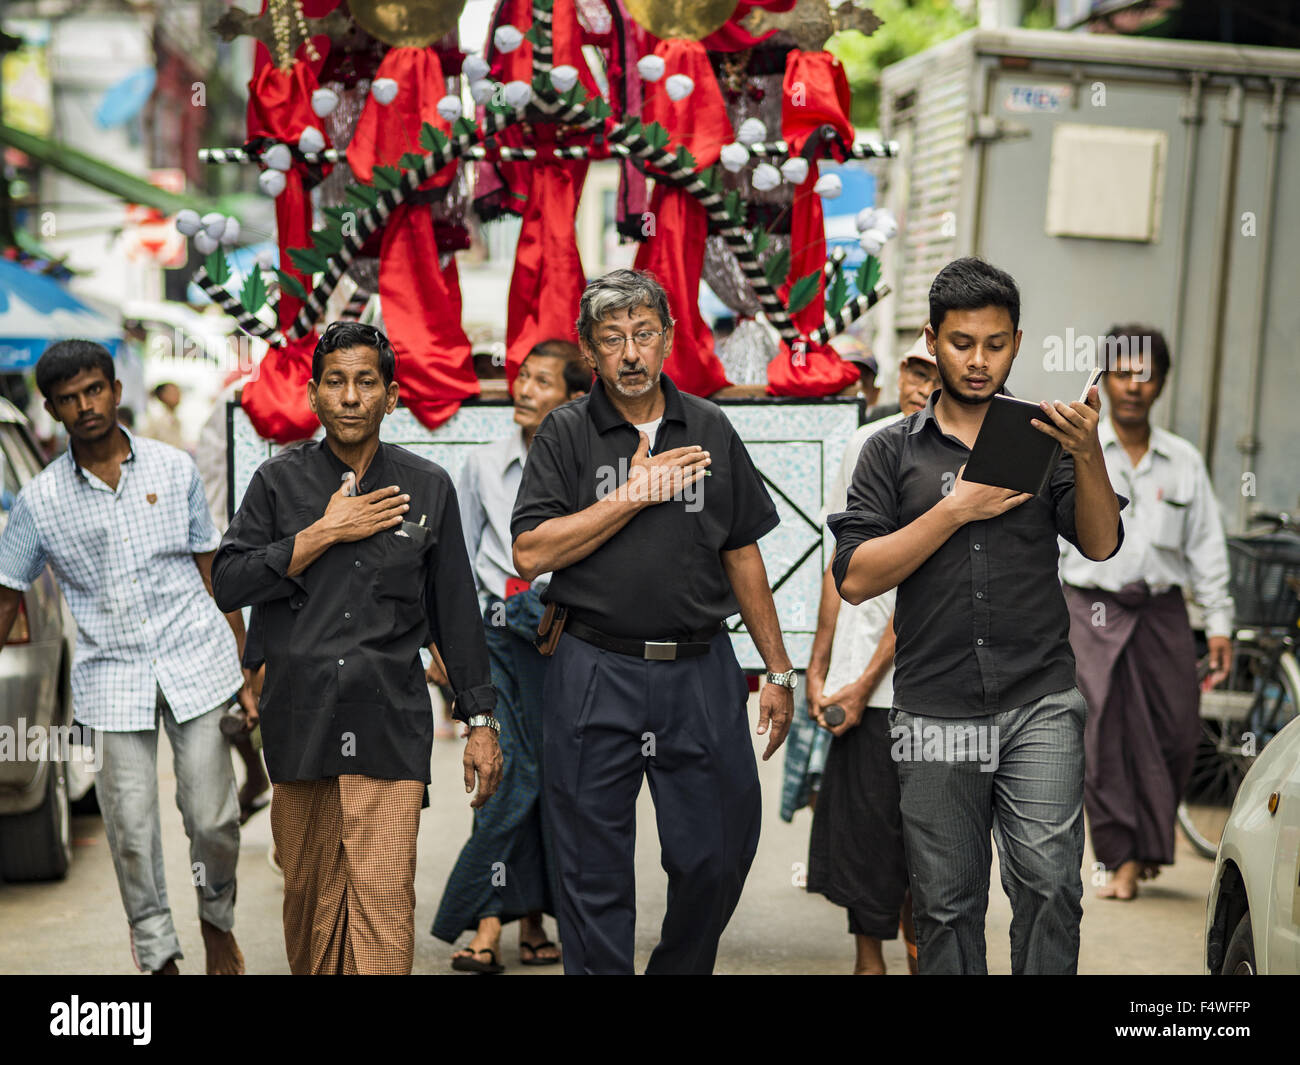 Yangon, Yangon Division, Myanmar. 23rd Oct, 2015. An Ashura procession goes past Punja Mosque in Yangon. Ashura commemorates the death of Hussein ibn Ali, the grandson of the Prophet Muhammed, in the 7th century. Hussein ibn Ali is considered by Shia Muslims to be the third imam and the rightful successor of Muhammed. He was killed at the Battle of Karbala in 610 CE on the 10th day of Muharram, the first month of the Islamic calendar. According to Myanmar government statistics, only about 4% of the population is Muslim. Many Muslims have fled Myanmar in recent years because of violence direct Stock Photo